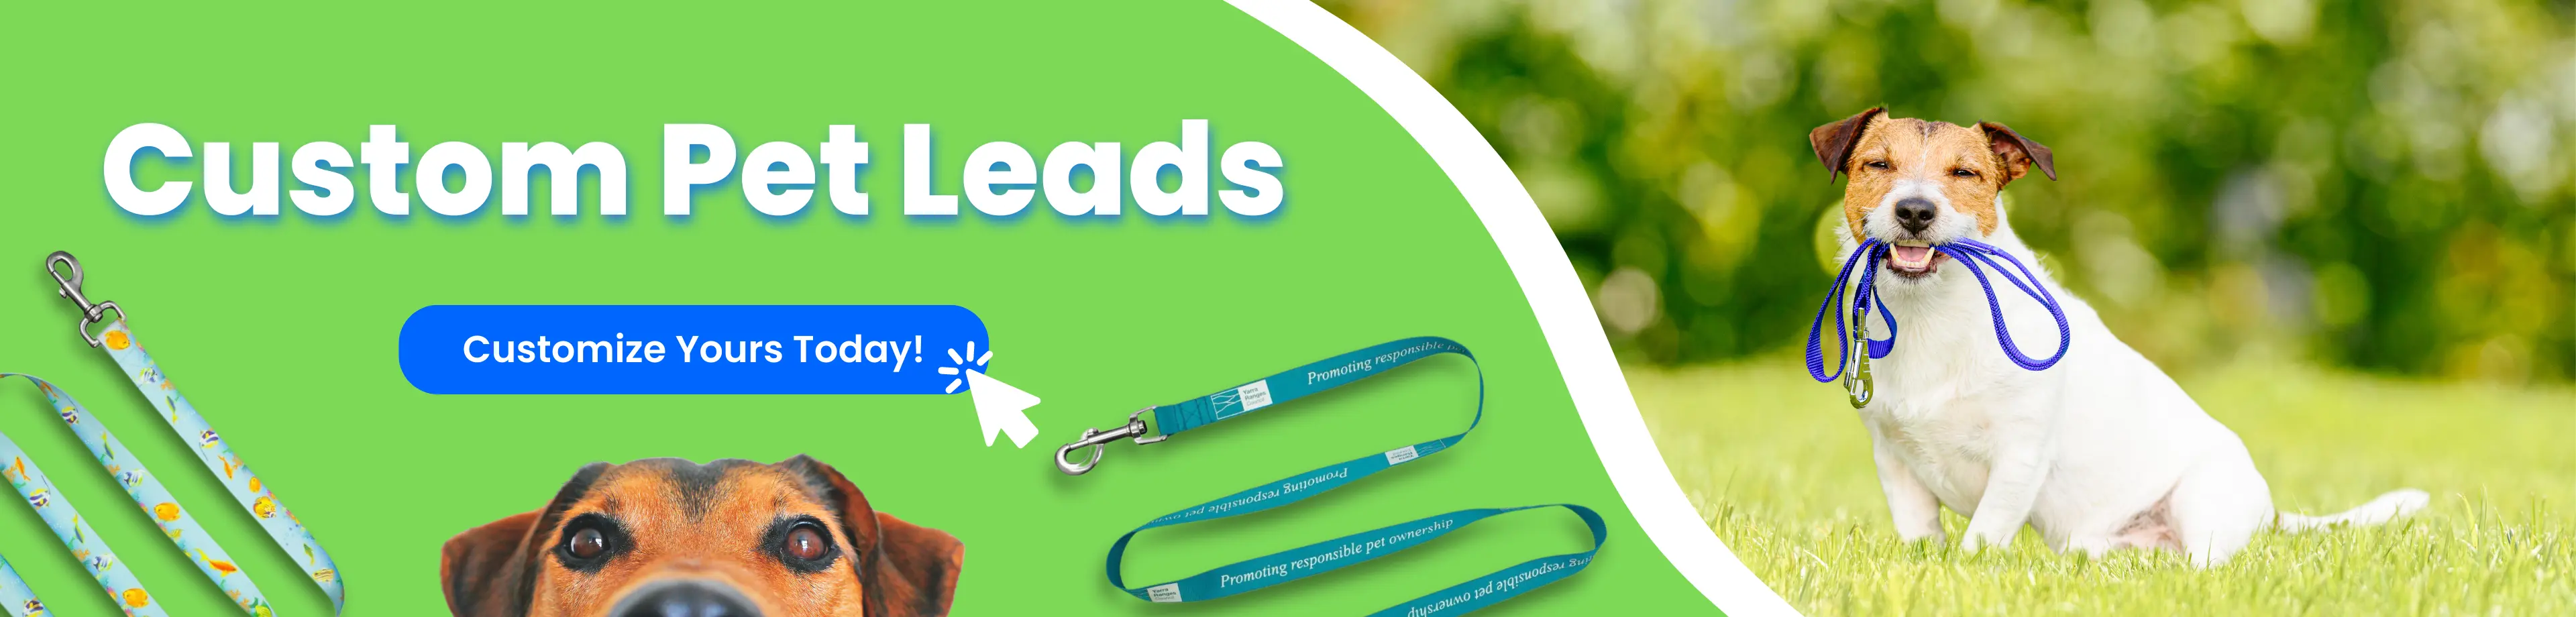 Custom Pet Leads - Take your message and furry friends on walkies for awesome brand visibility!